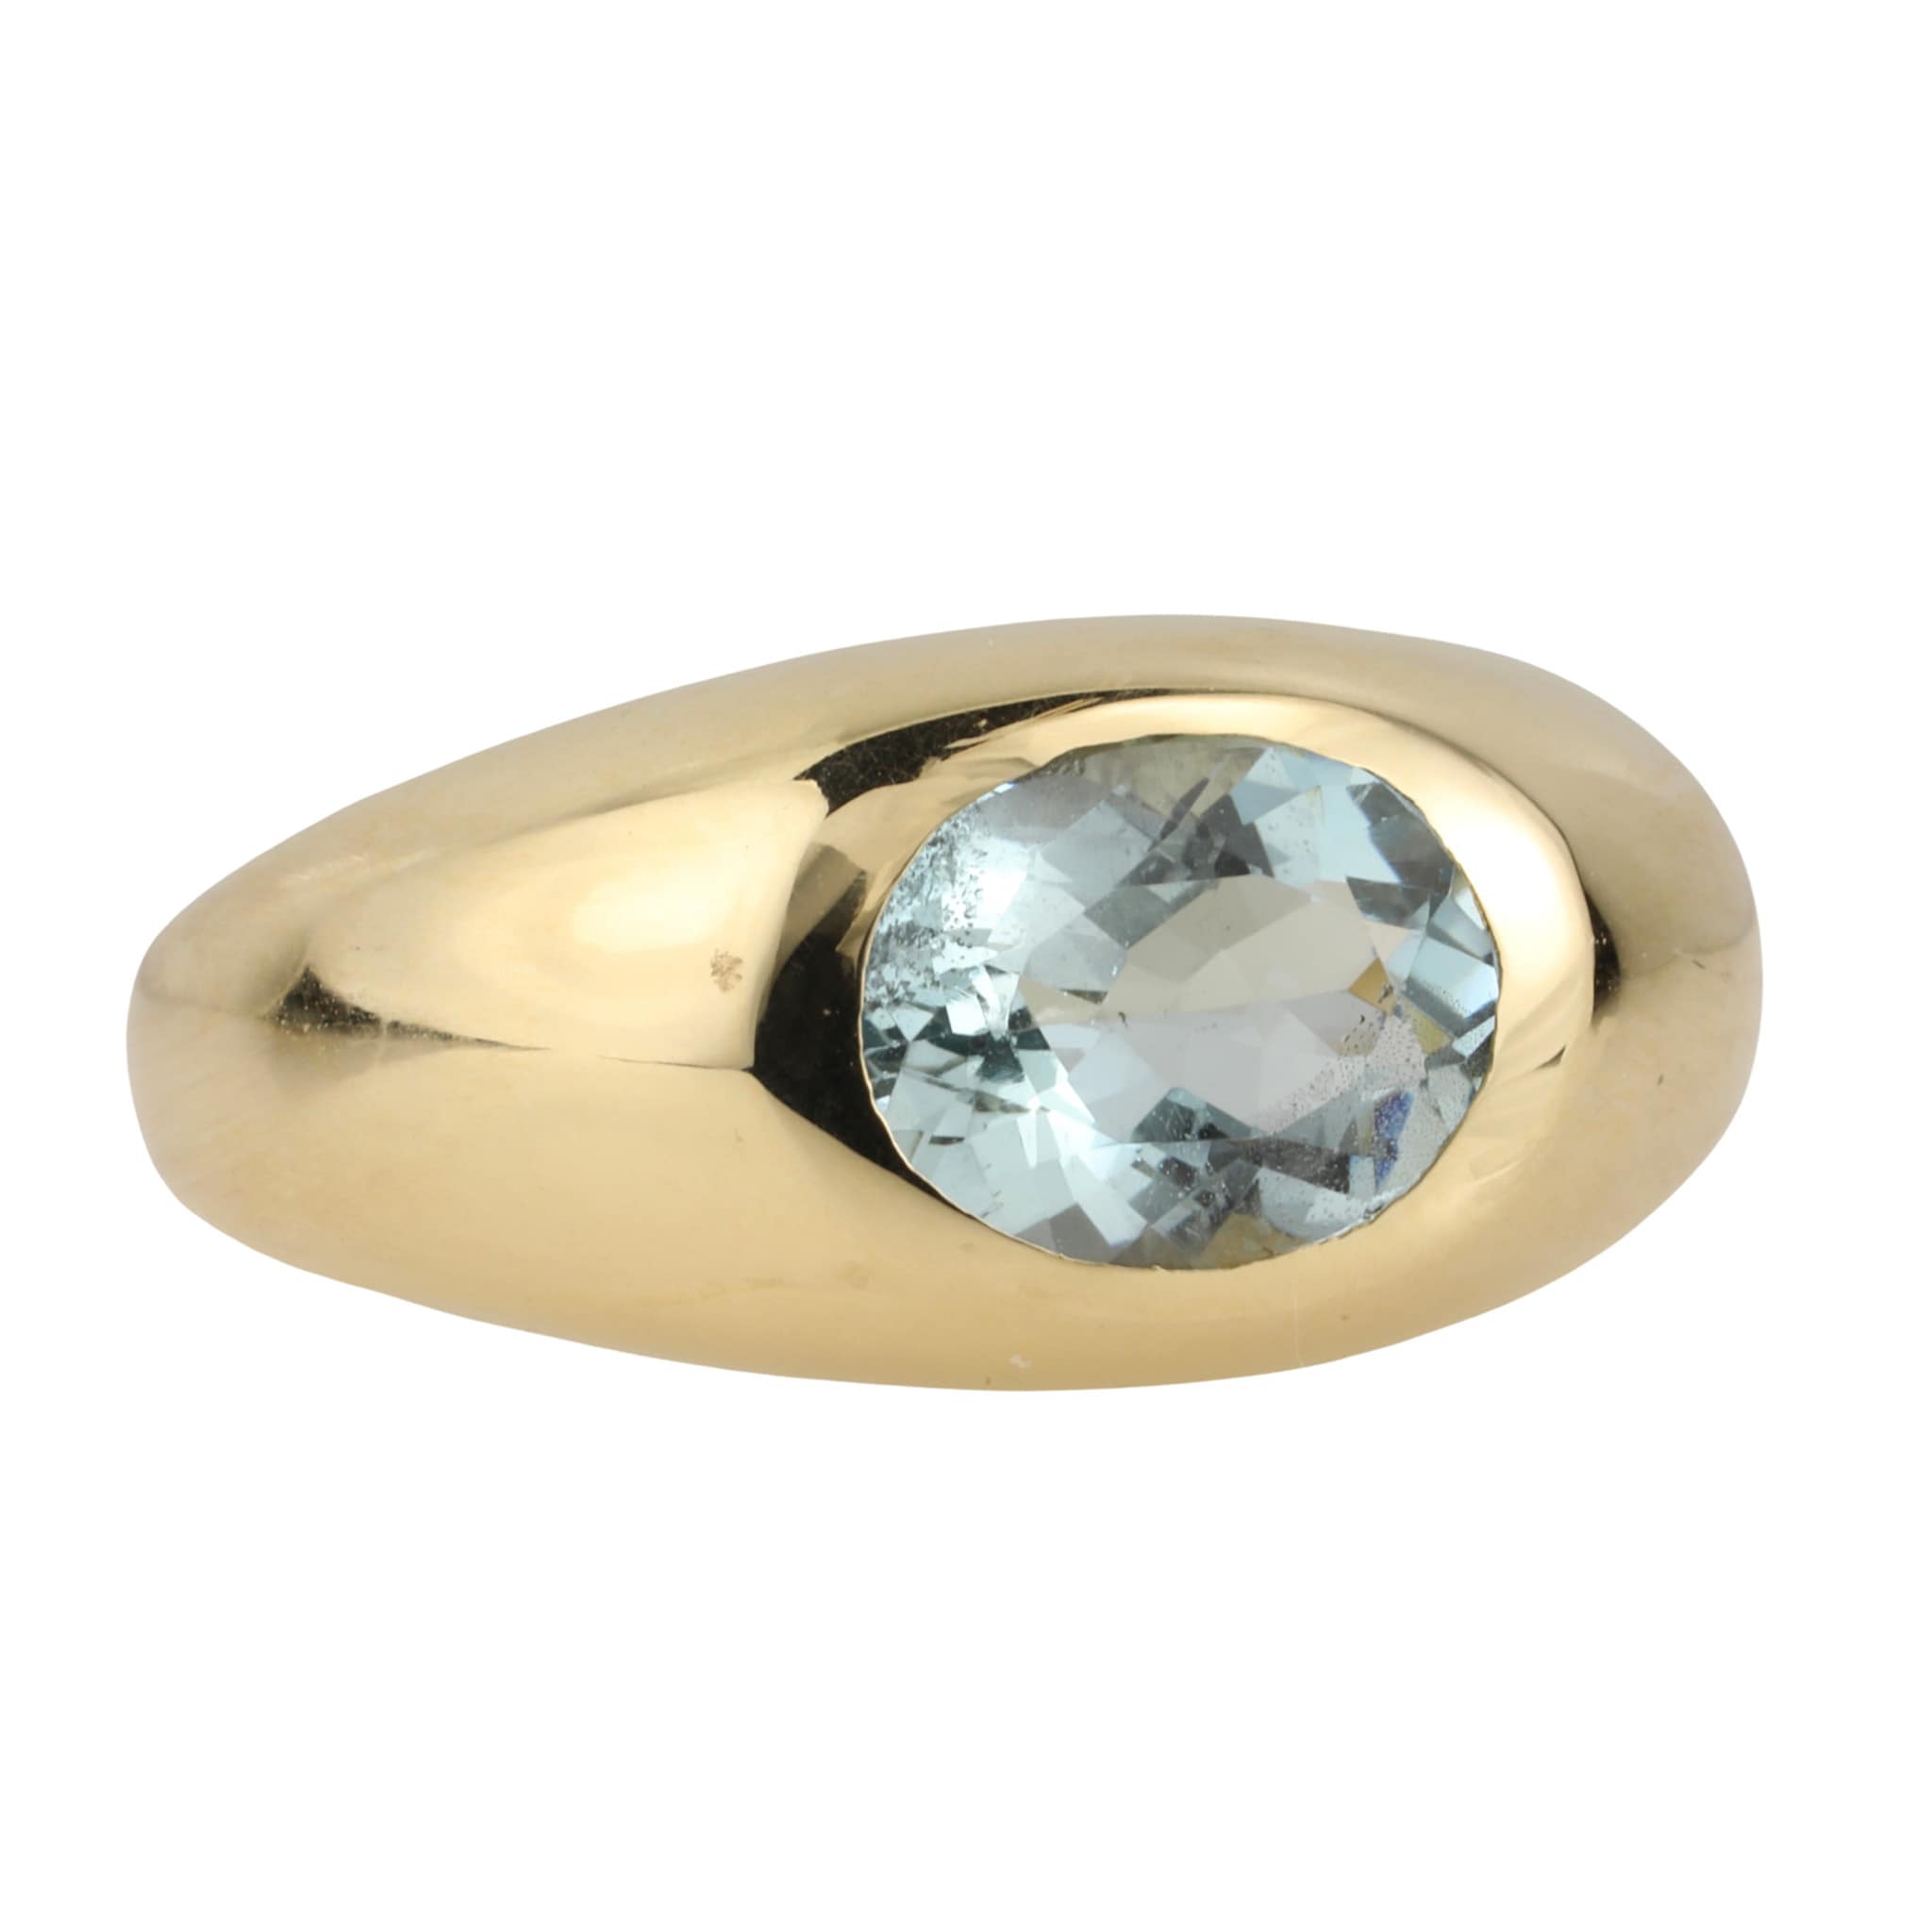 14K Gold Signet Dome Ring with Oval Aquamarine - Peridot Fine Jewelry - Jacquie Aiche